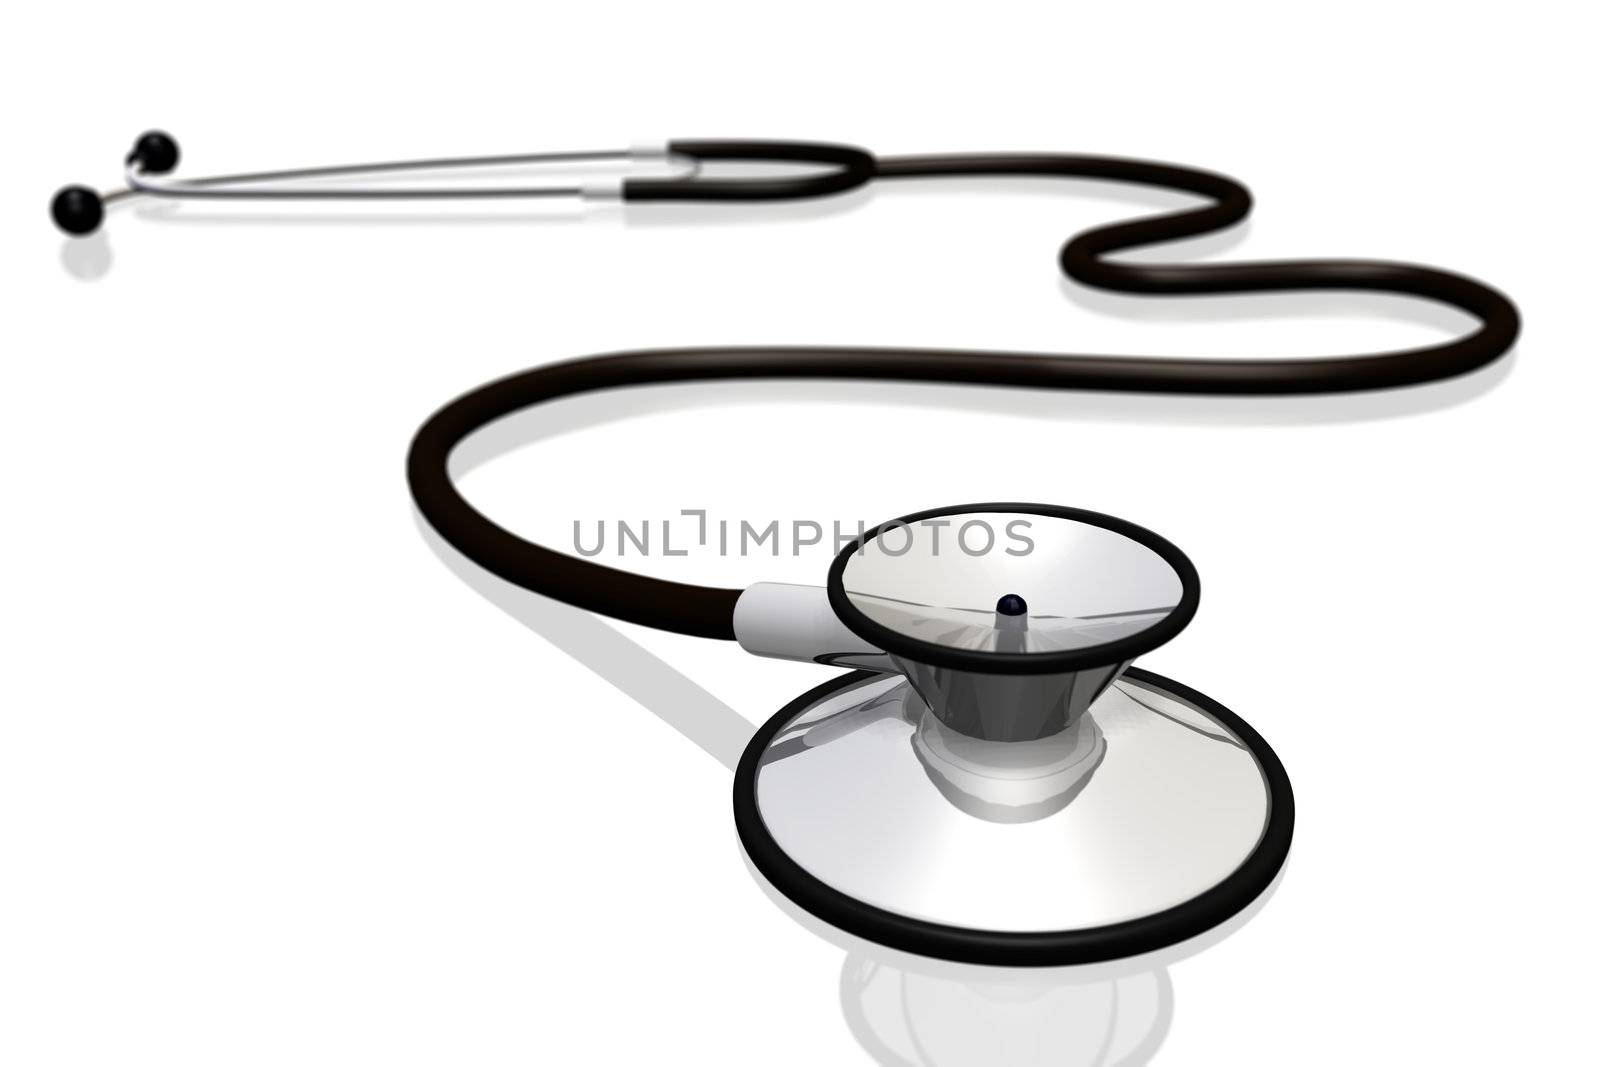 Stethoscope by nmarques74